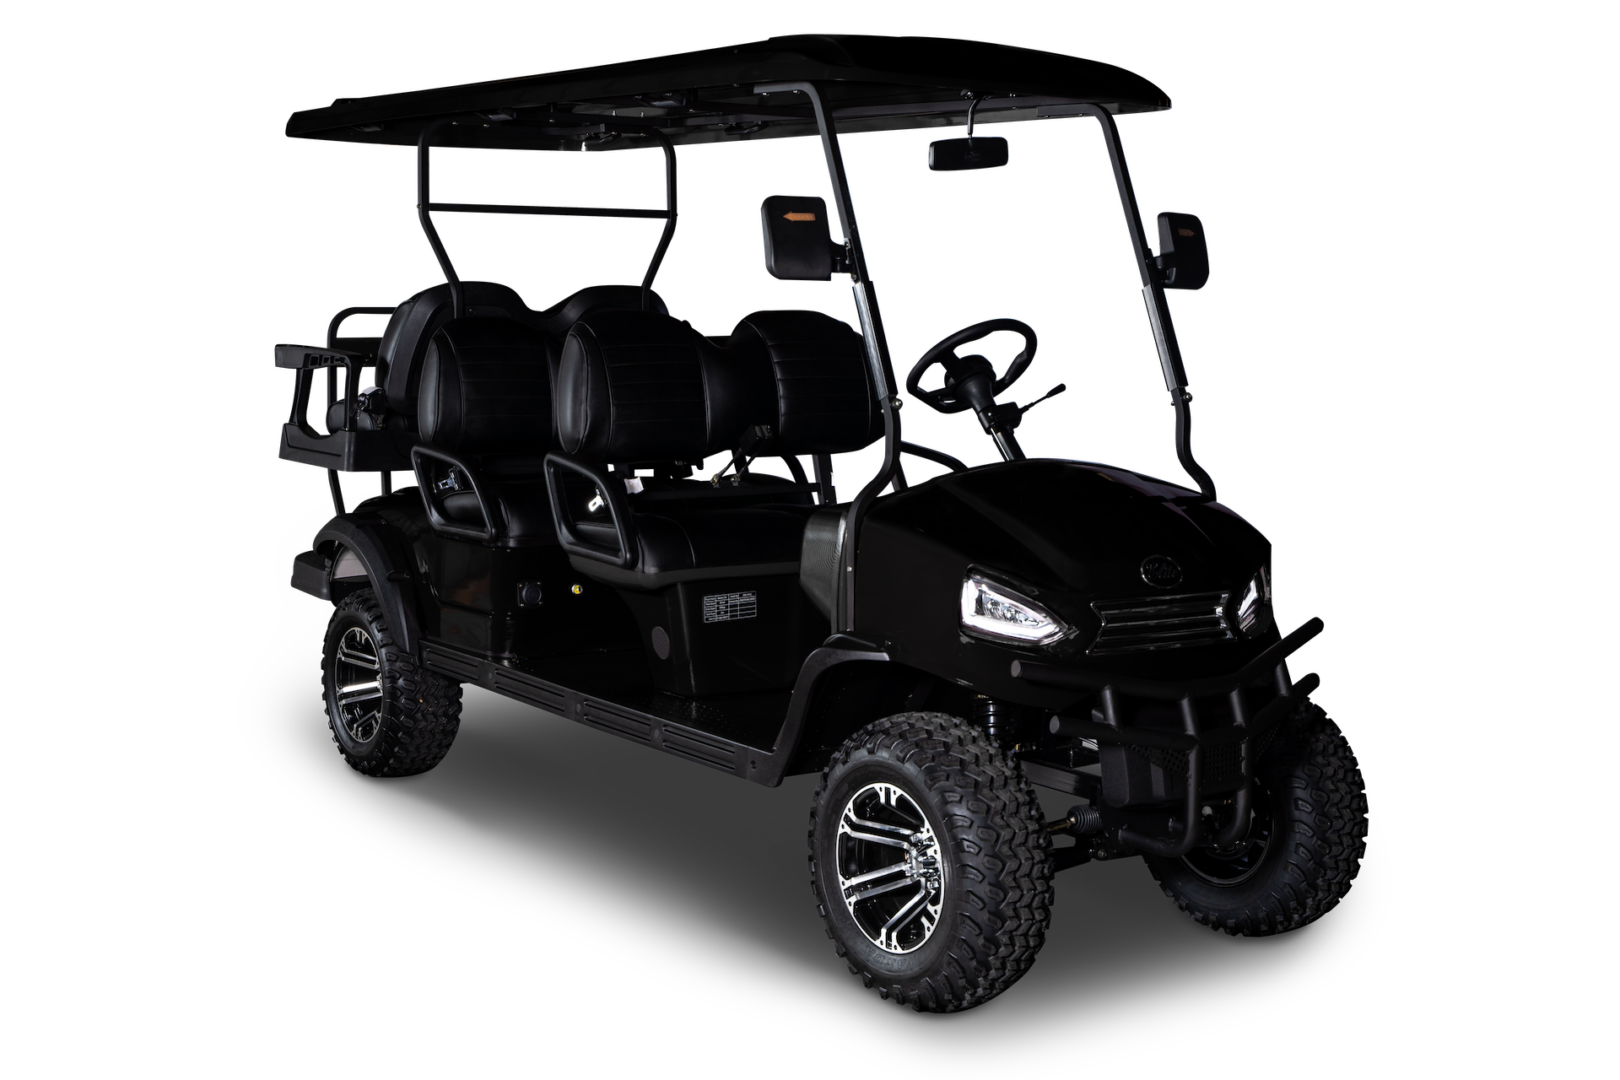 A black golf cart is shown in this picture.